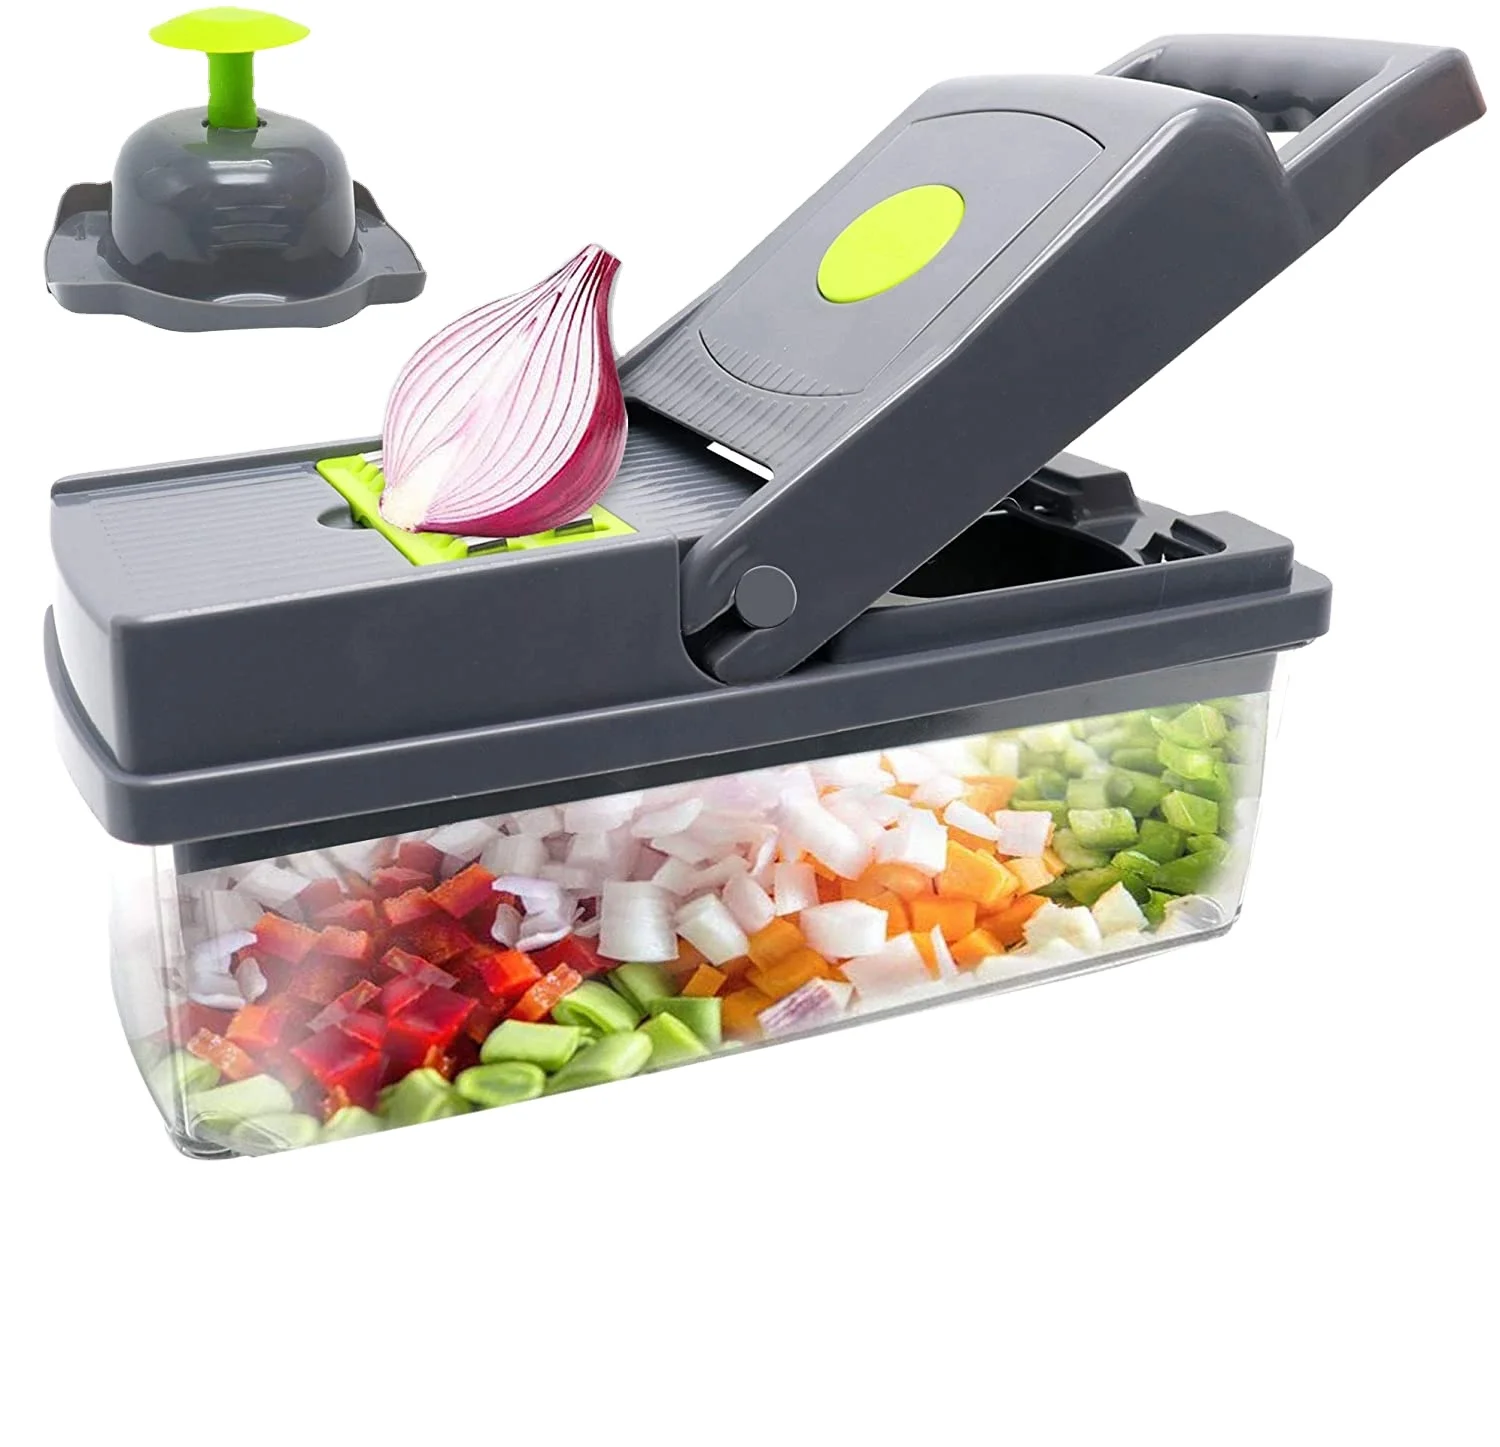 

USA Local Warehouse 1Day Shipping 14 In 1Peeler With Container 8 Blades Onion Slicer Dicer Kitchen Food Vegetable Chopper Cutter